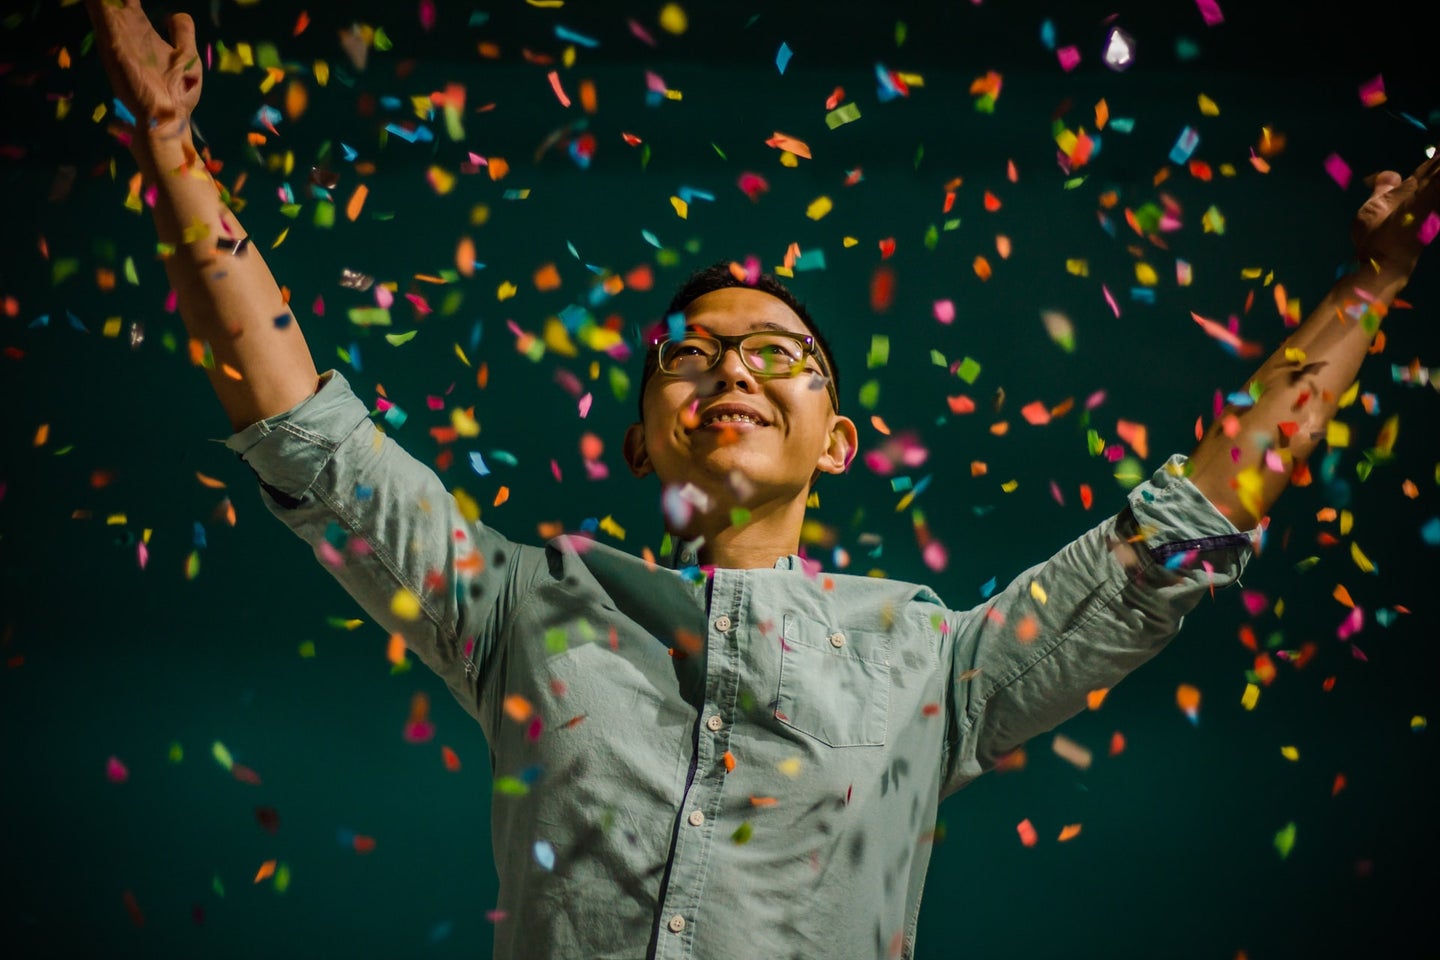 A person in glasses and a buttoned shirt tossing a handful of colorful confetti in the air